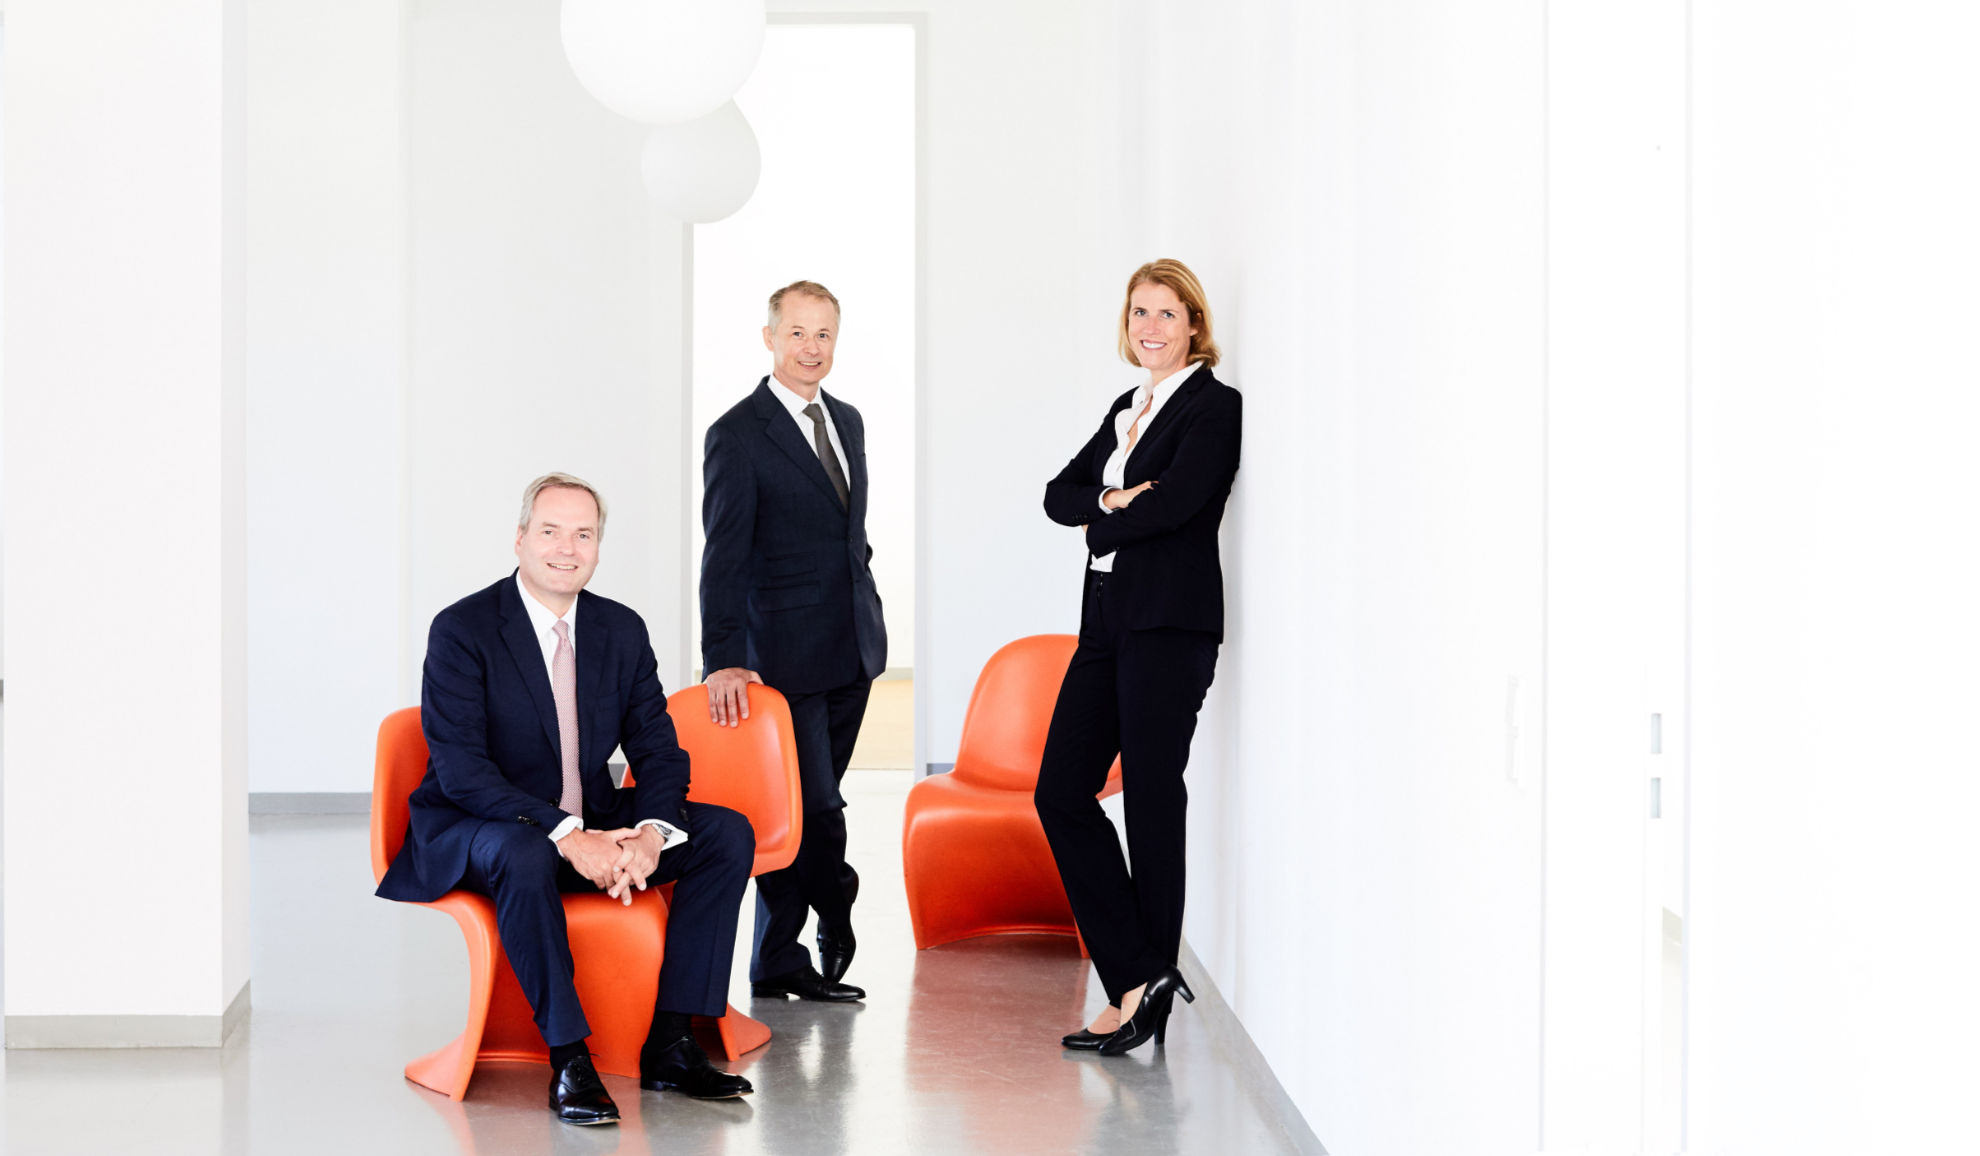 The partners of Loy&Co - Beatrice Berg, Markus Loy und Gunther Herion